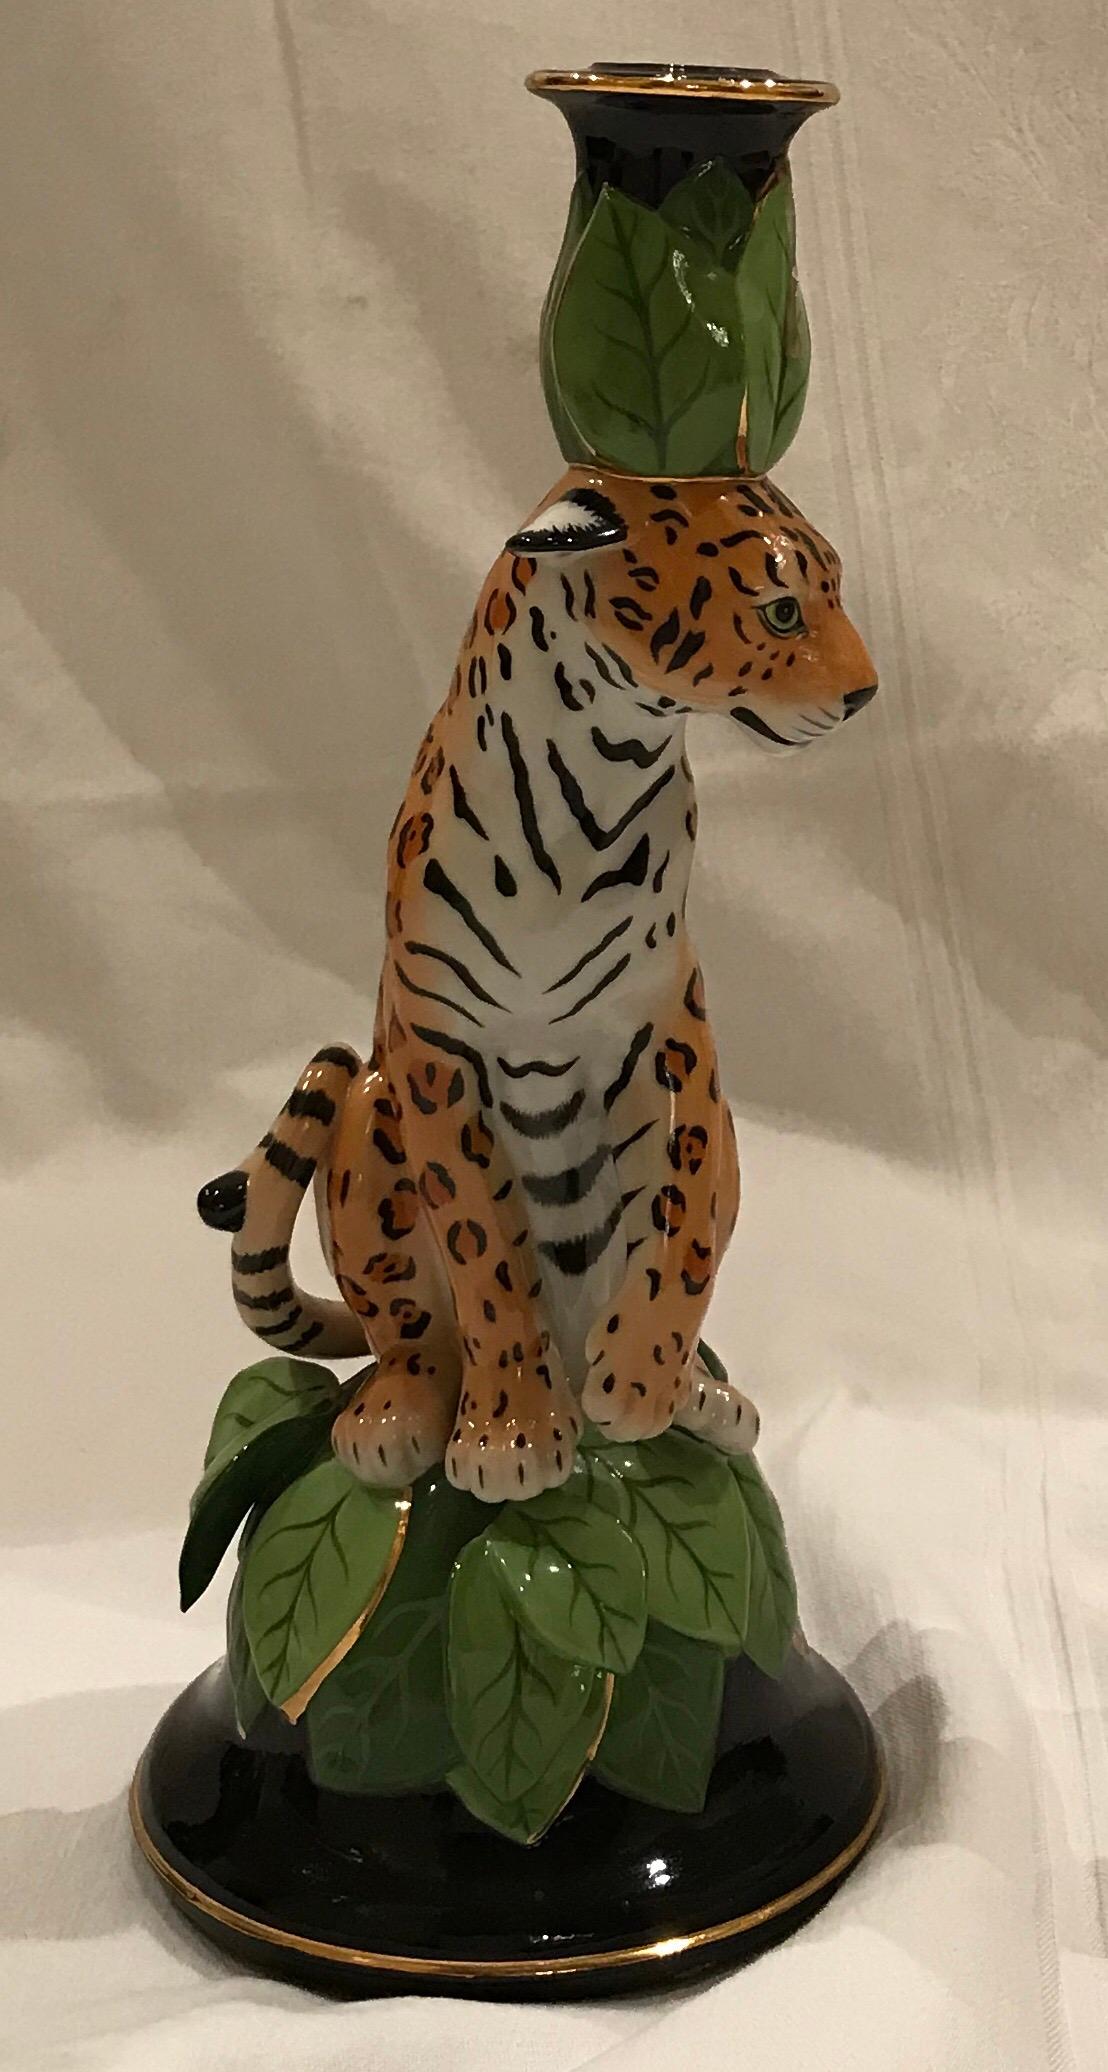 20th Century “Jaguar Jungle” Ceramic Candleholder / Sculpture by Lynn Chase In Good Condition For Sale In South Newfane, VT